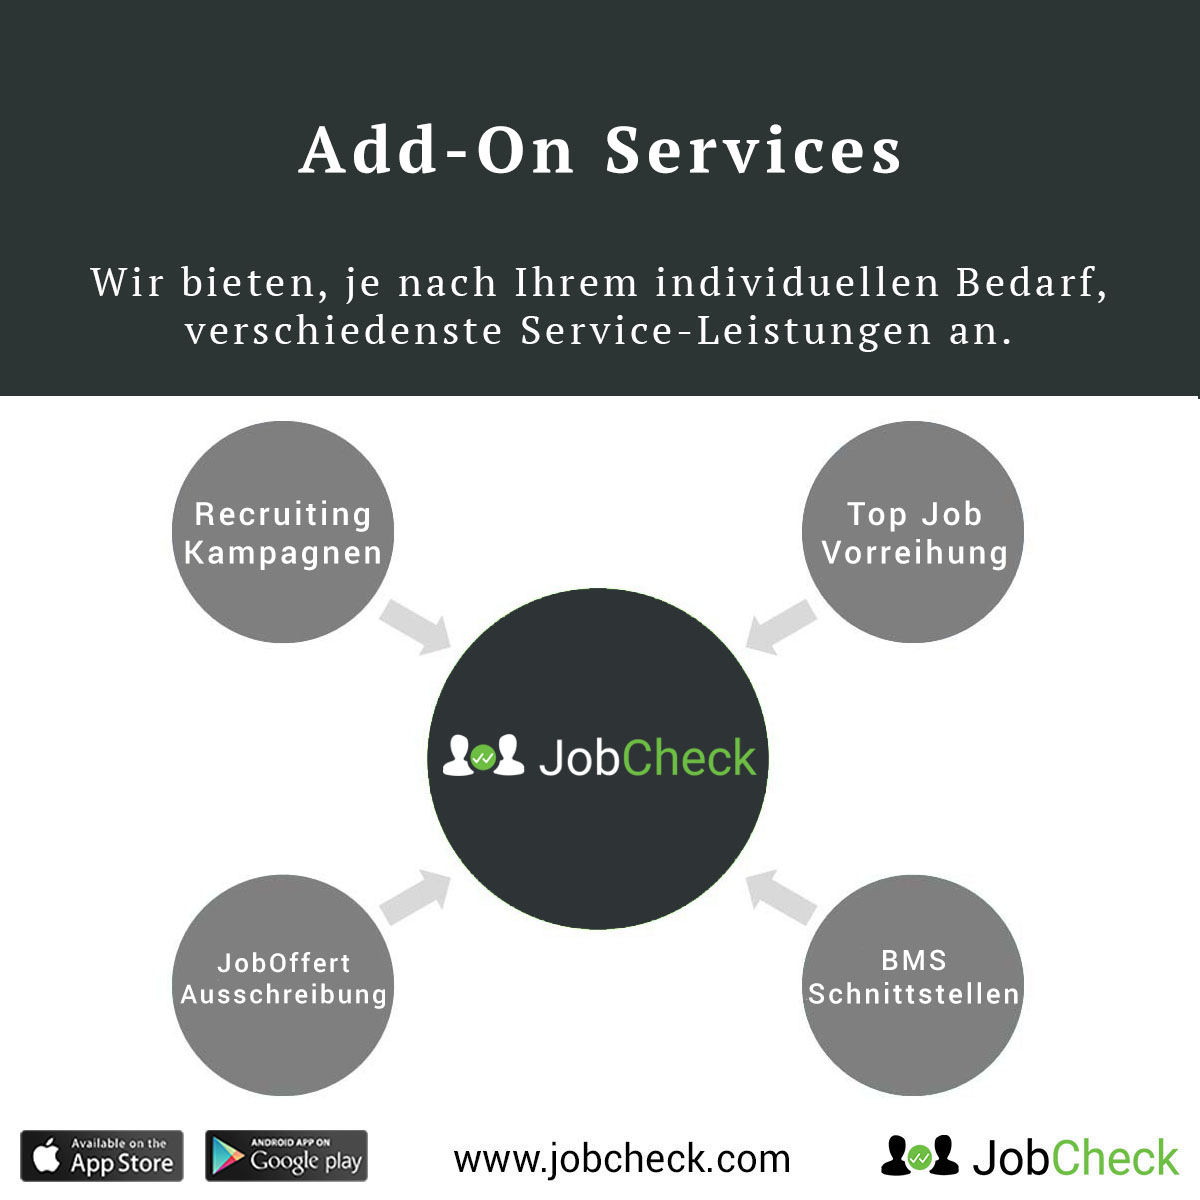 jobcheck-recruiting-add-on-services